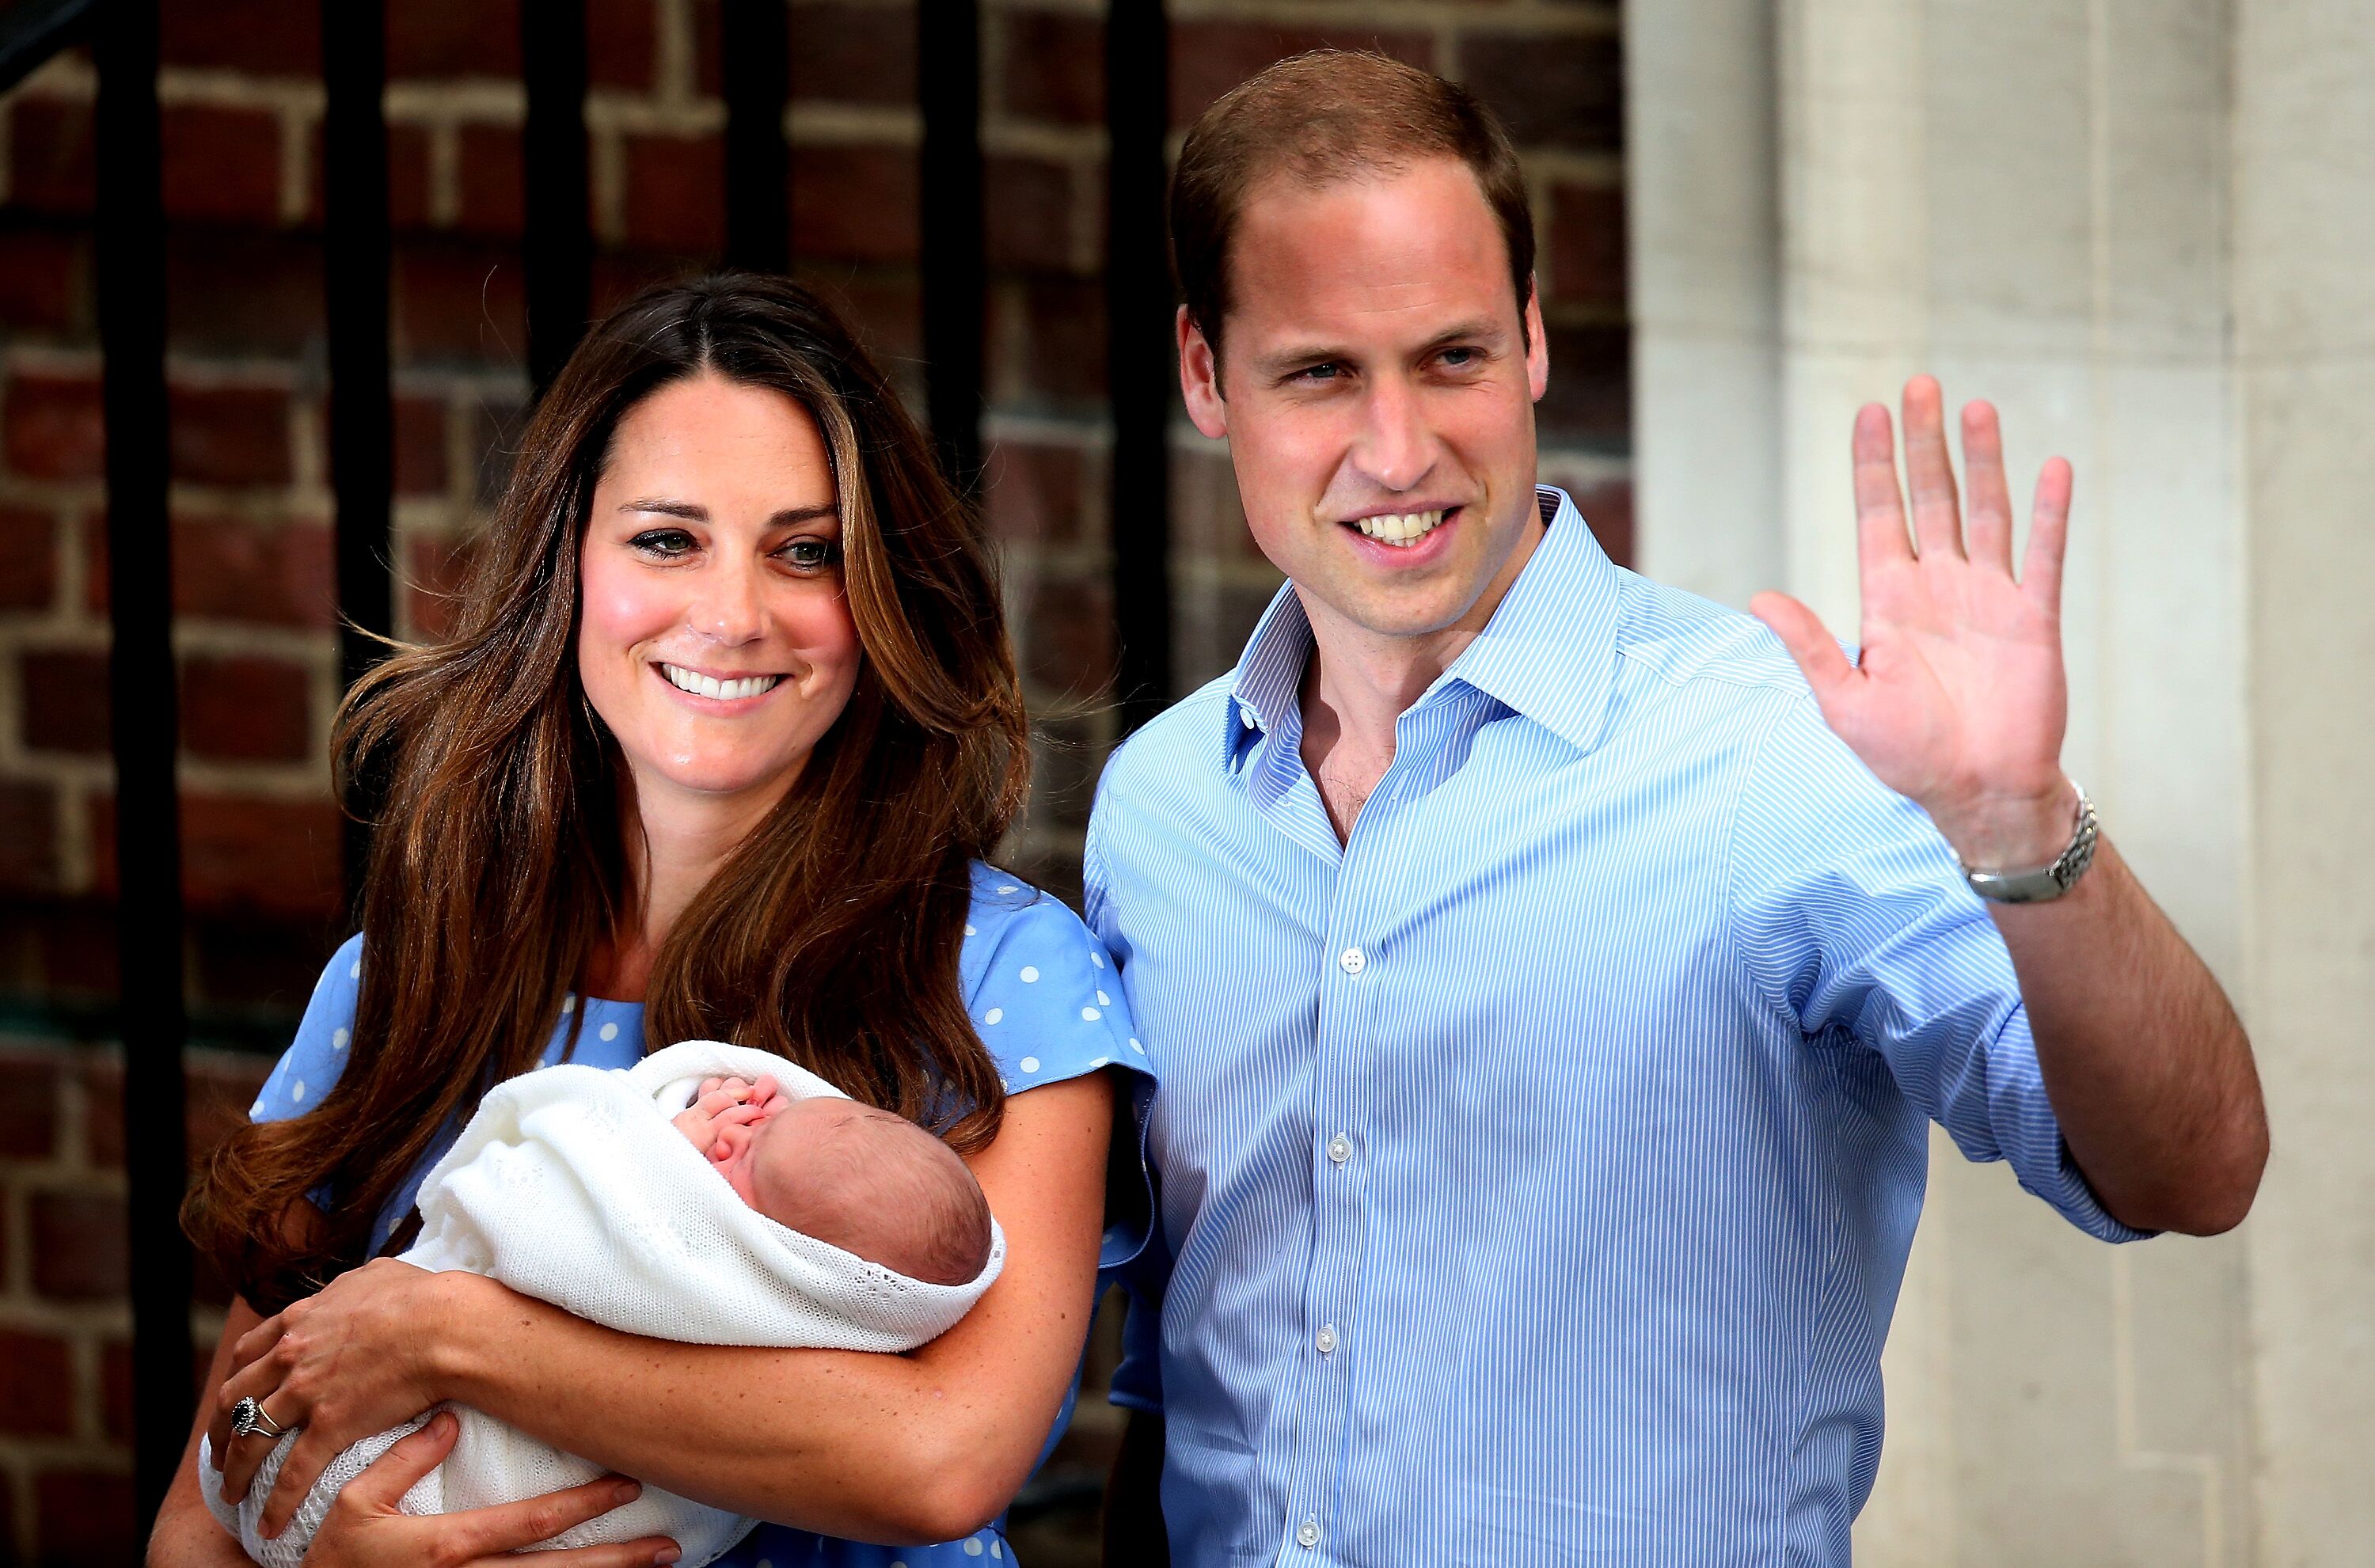 Prince William, Duke of Cambridge and Catherine, Duchess of Cambridge, depart The Lindo Wing with their newborn son at St Mary's Hospital. | Source: Getty Images